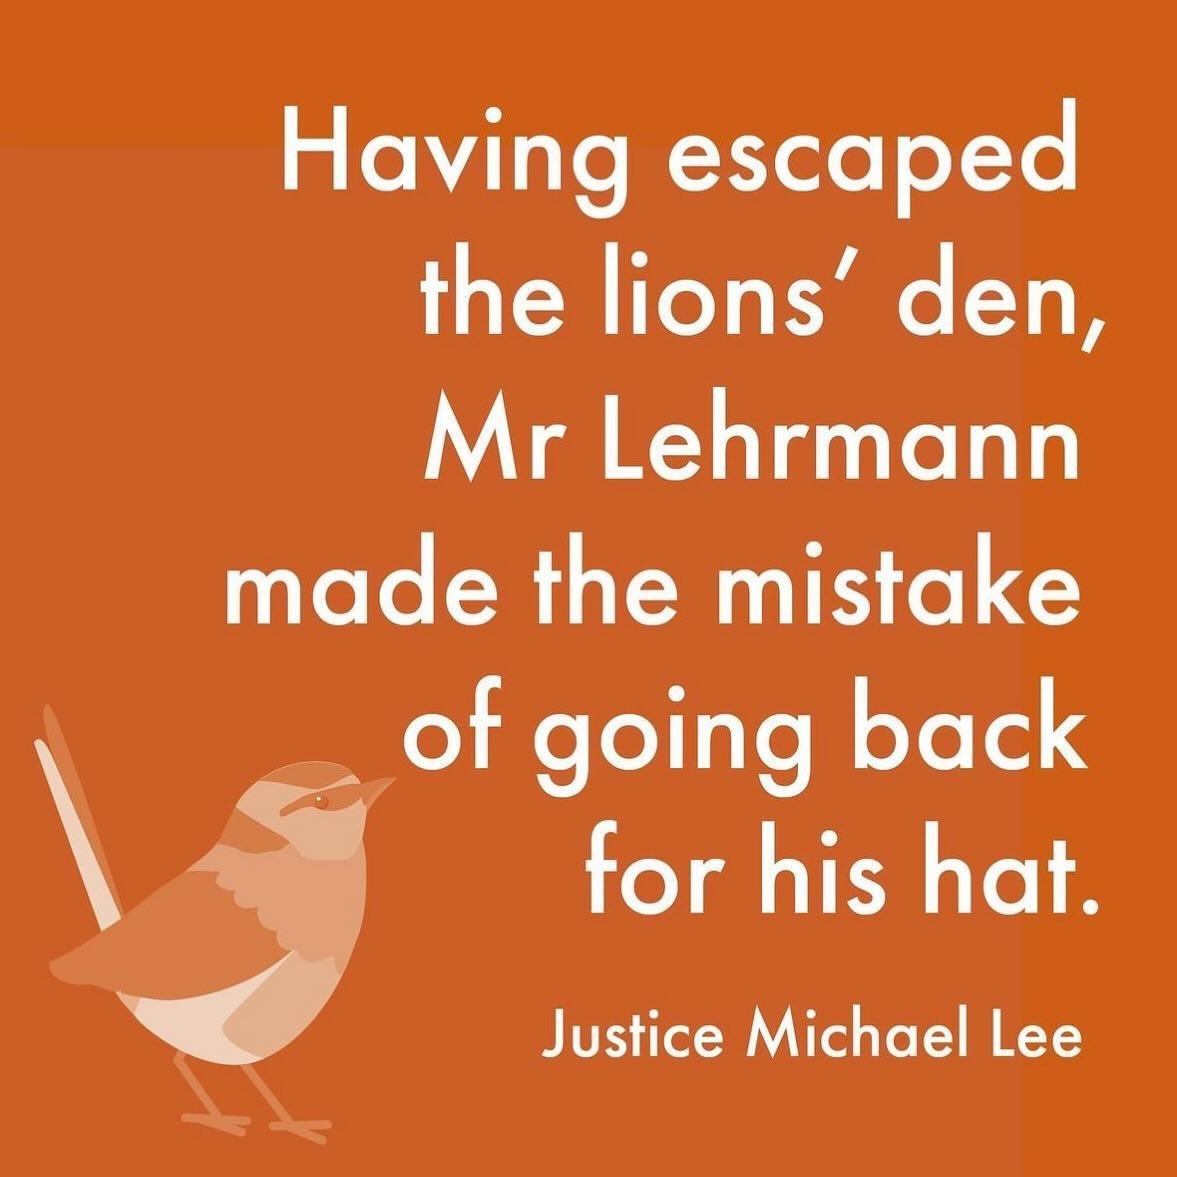 Justice Michael Lee handed down his judgment yesterday finding that on the balance of probabilities, Bruce Lehrmann raped Brittany Higgins in Senator Reynolds&rsquo; office in Parliament House of Australia. The judge said Lehrmann did so knowing that